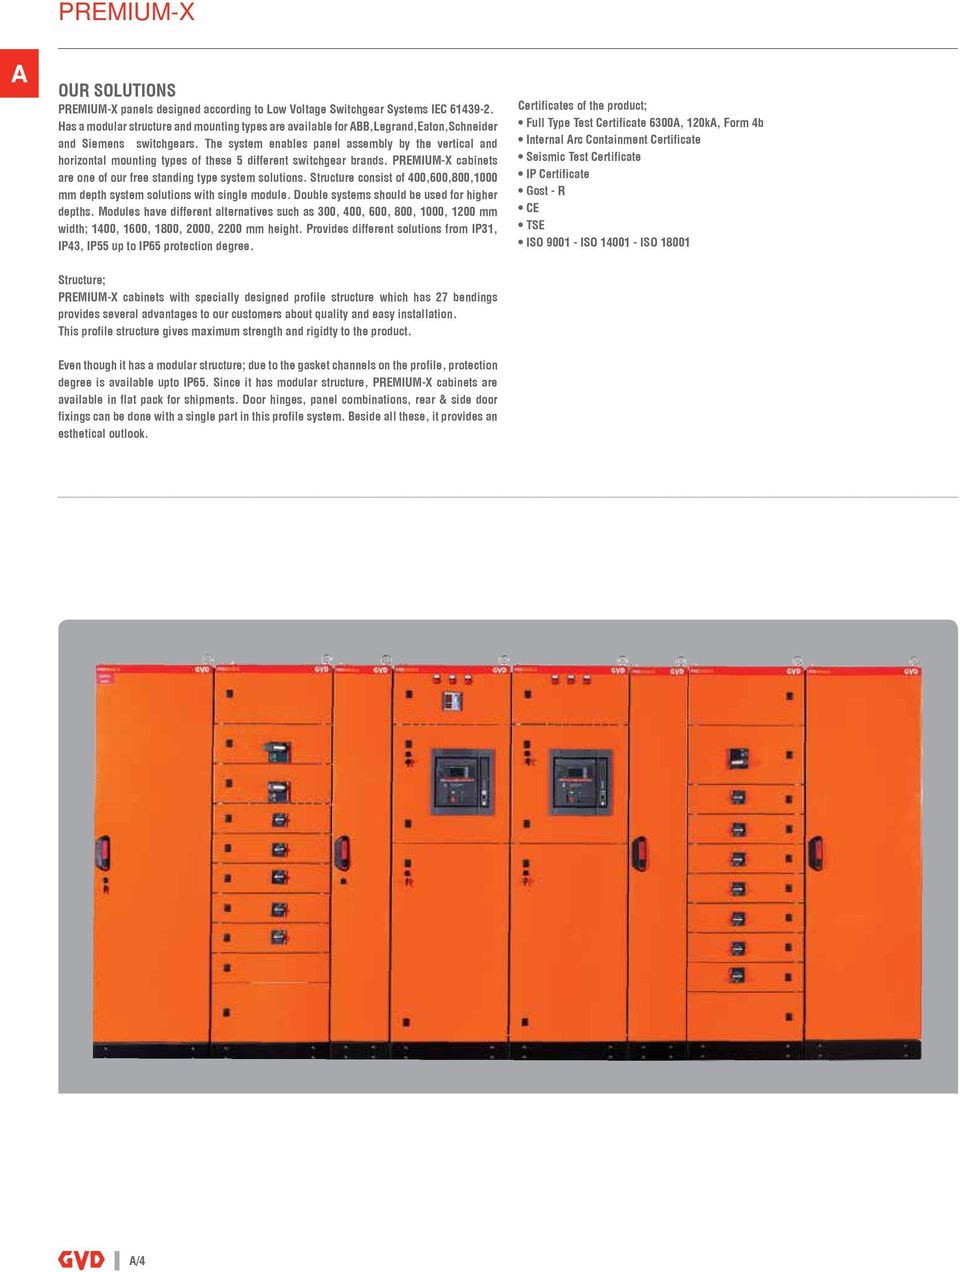 The system enables panel assembly by the vertical and horizontal mounting types of these 5 different switchgear brands. PREMIUM-X cabinets are one of our free standing type system solutions.